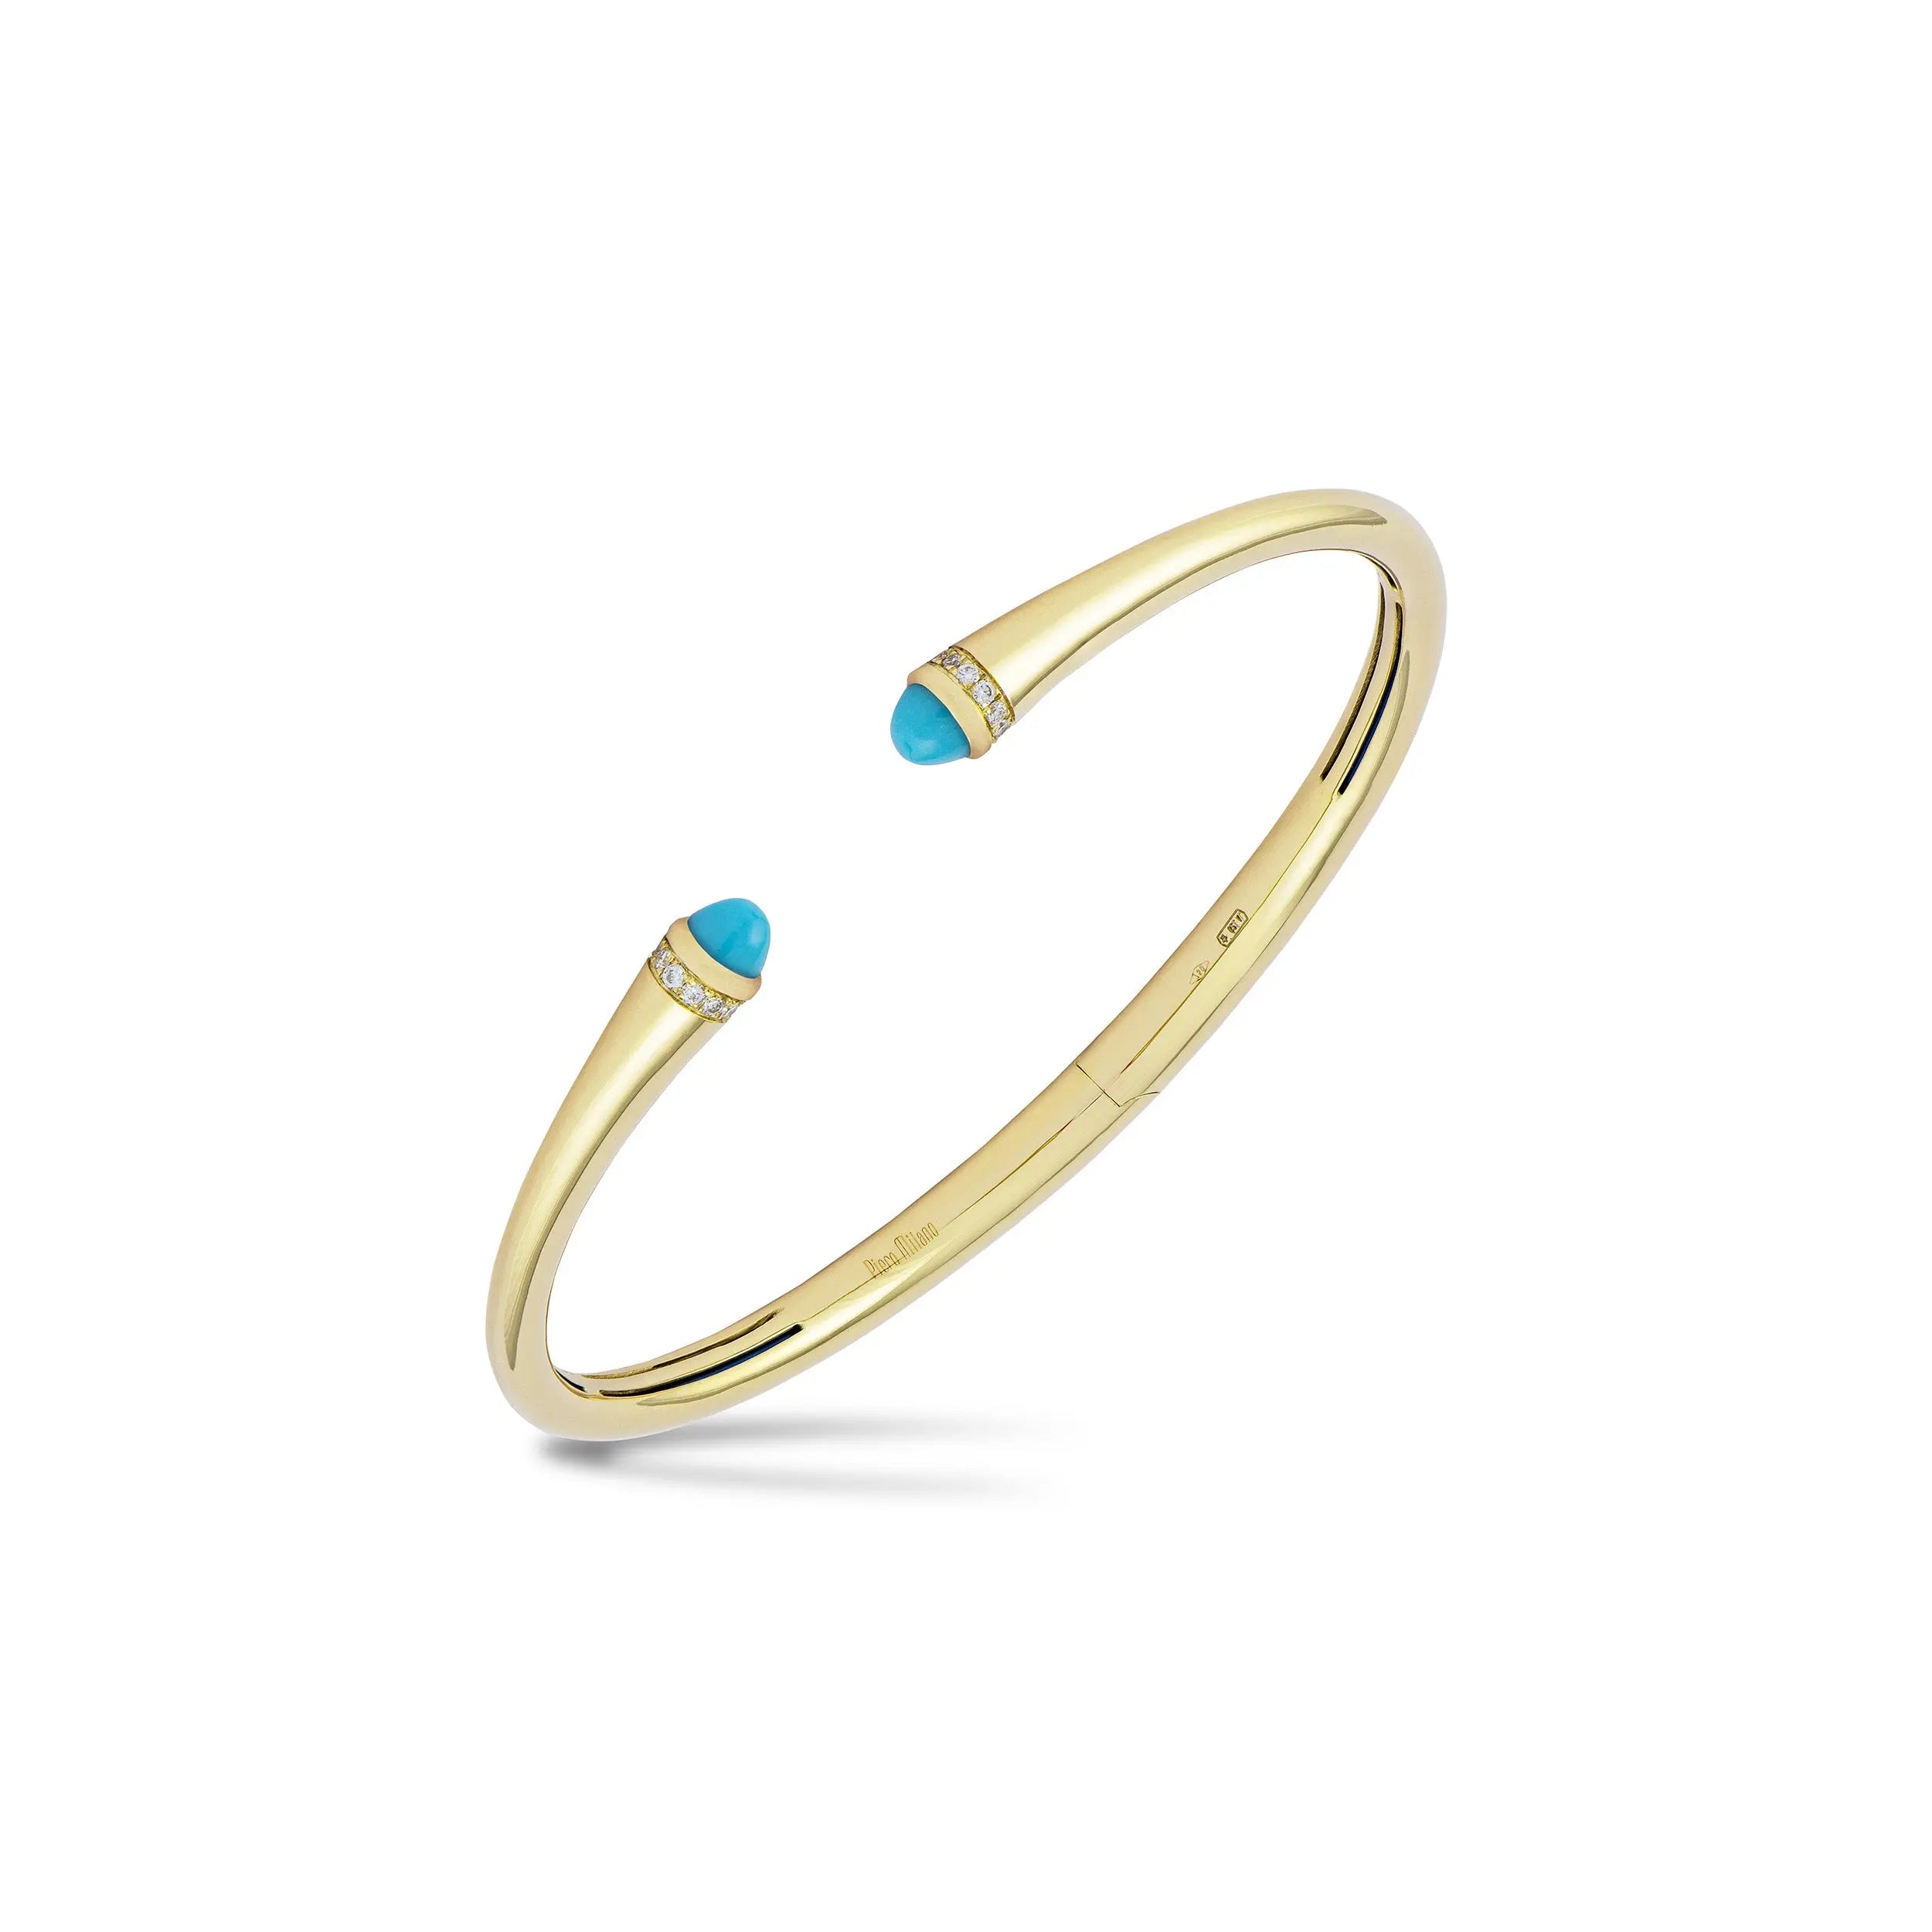 18k yellow gold diamond .11 cttw and turquoise .20 cttw bangle  Designed by Piero Milano and made in Italy